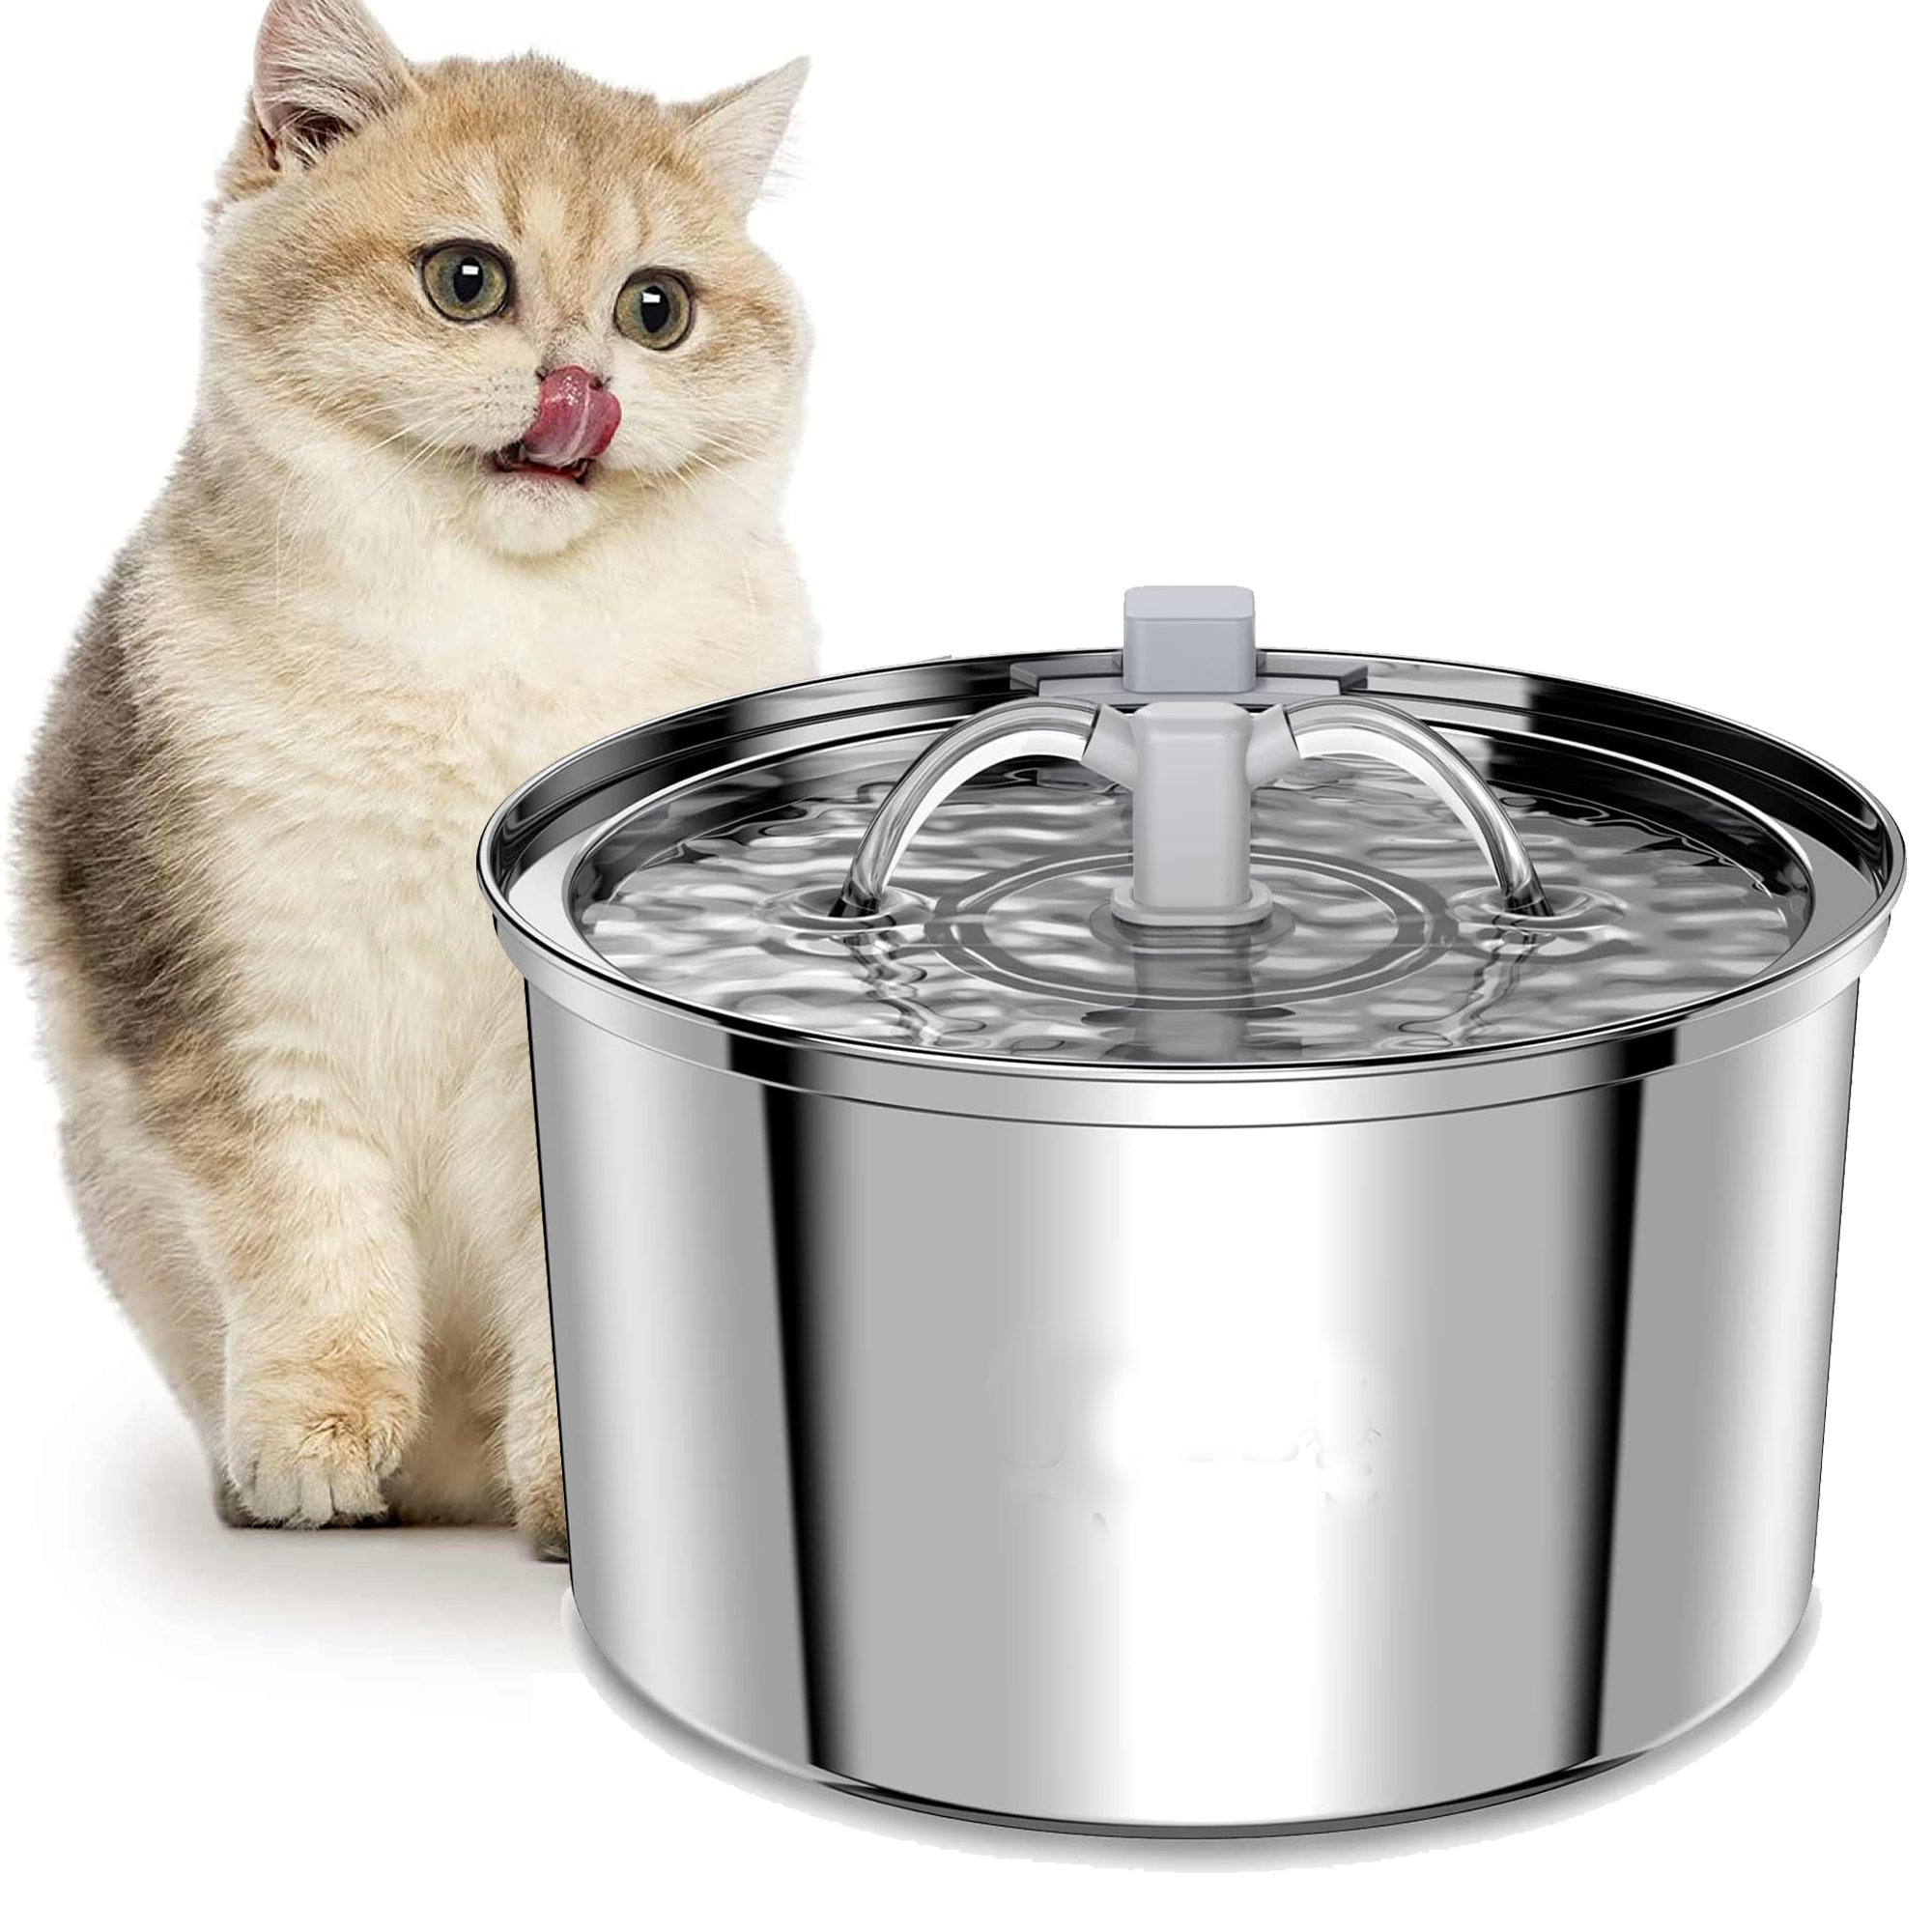 MIFXIN Automatic Electric Pet Water Fountain With Filter +mat & Reviews